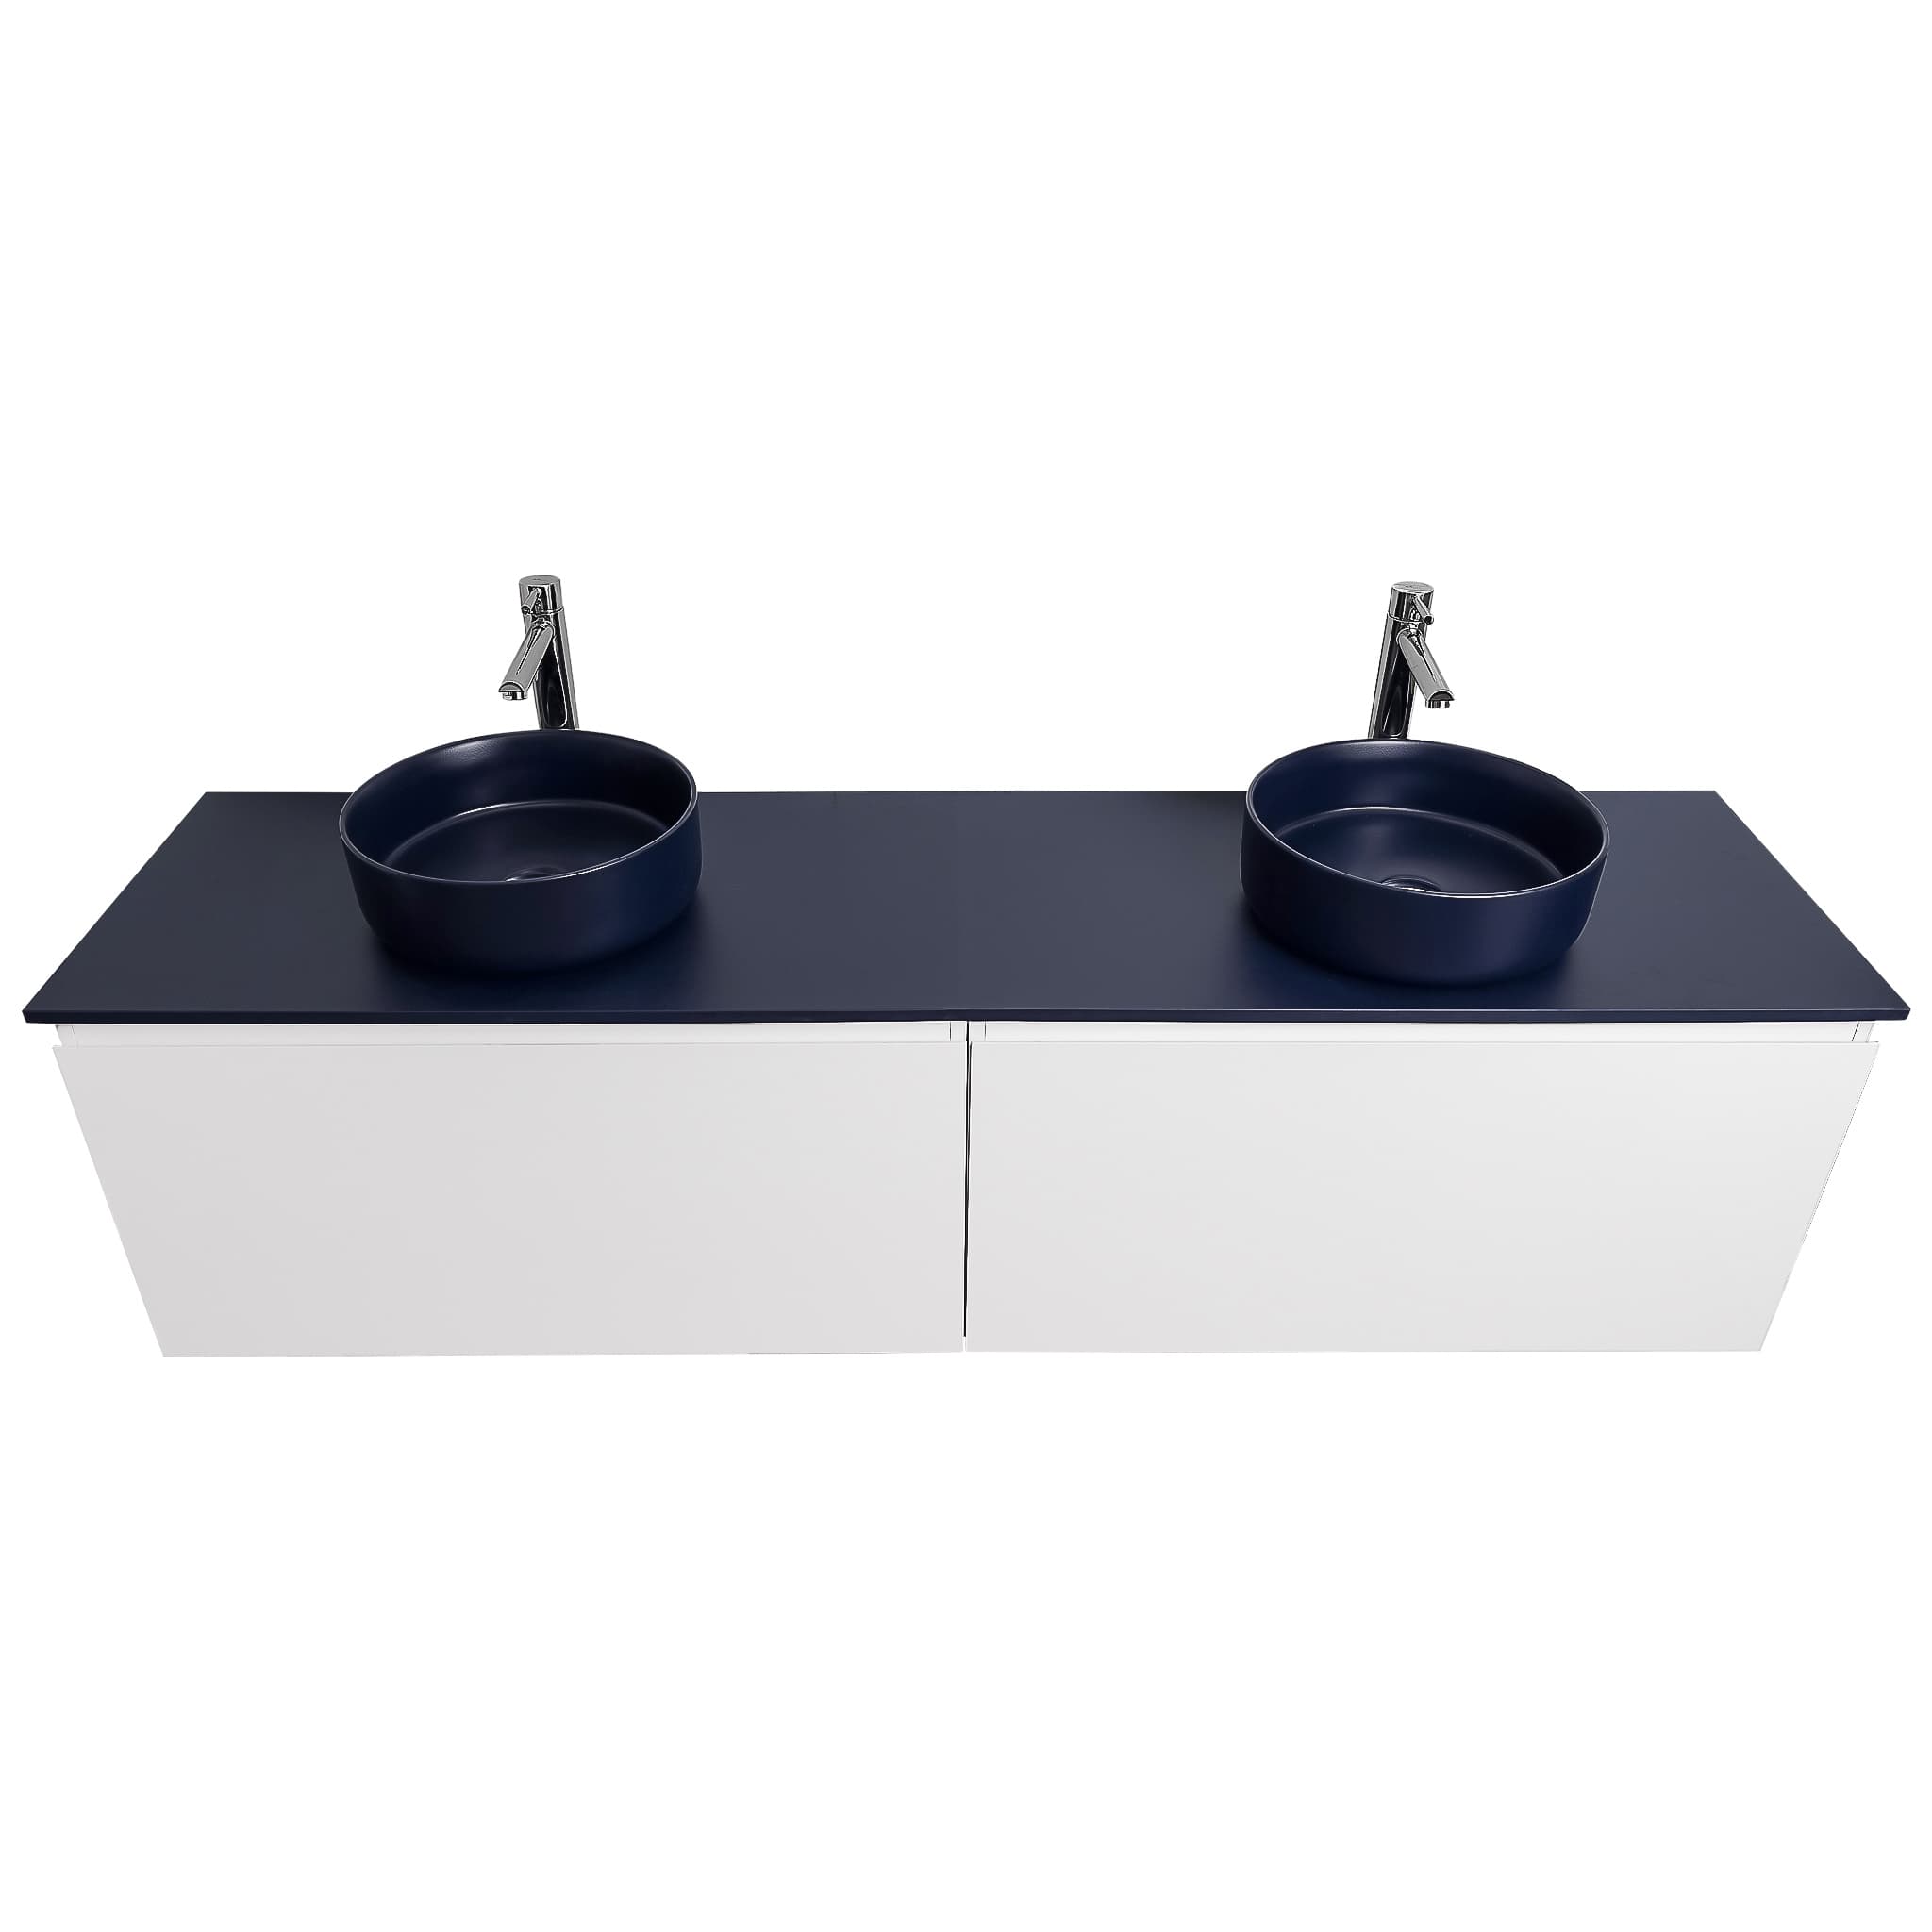 Venice 63 White High Gloss Cabinet, Ares Navy Blue Top And Two Ares Navy Blue Ceramic Basin, Wall Mounted Modern Vanity Set